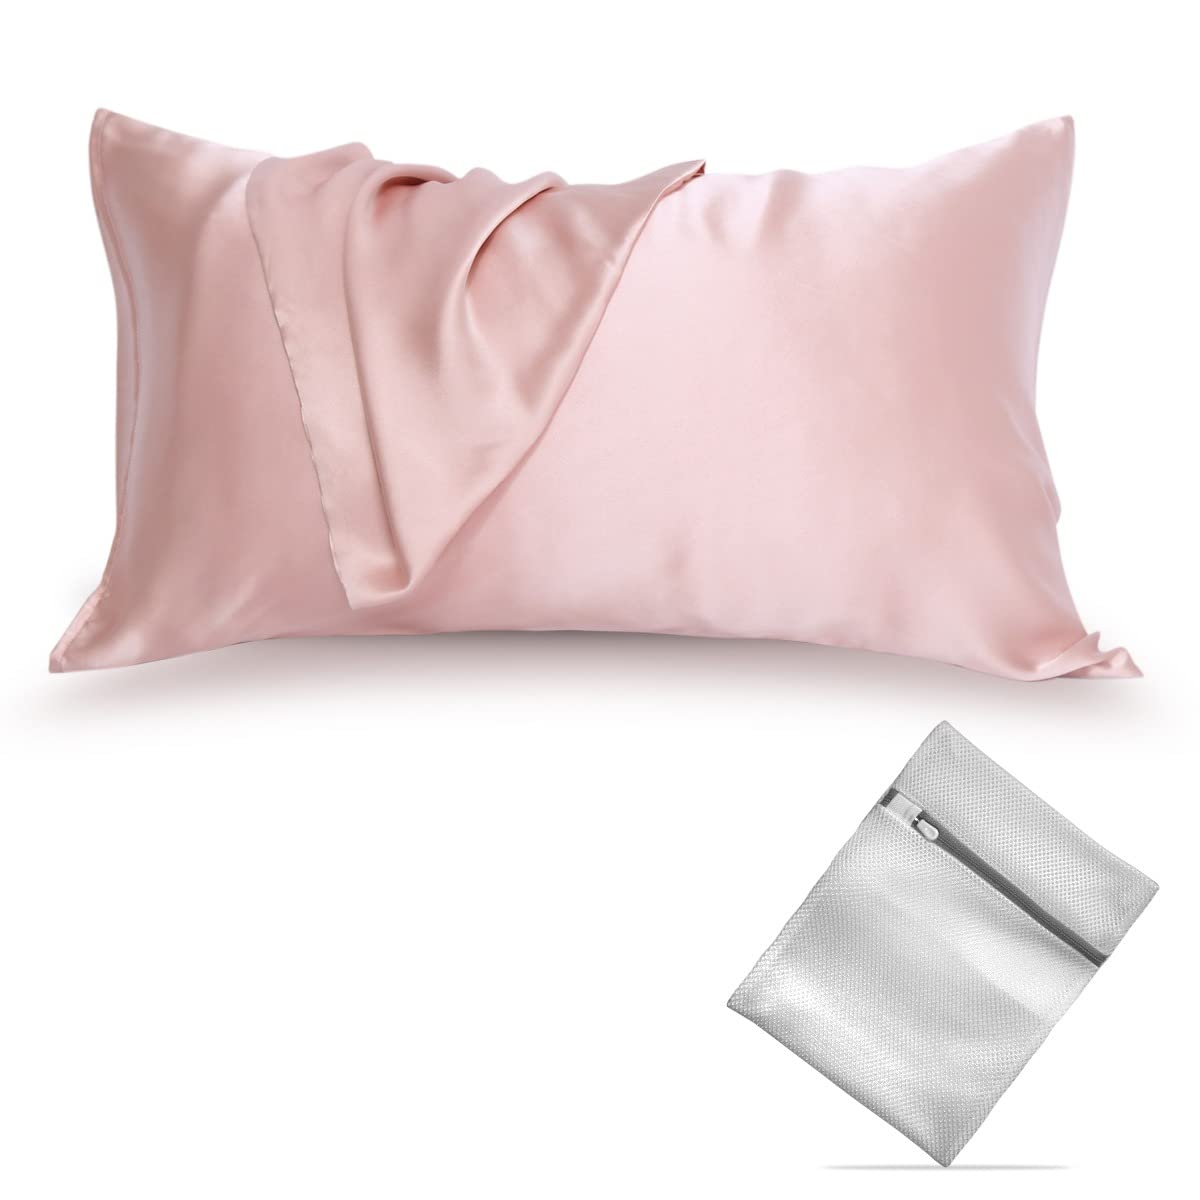 Cilkify Silk Pillowcase with Laundry Bag - 100% 19mm Mulberry Silk Pillowcase 50 X 75 cm - Silk Pillowcases for Hair and Skin - Silk Pillowcase UK – Envelope Style (Blush)